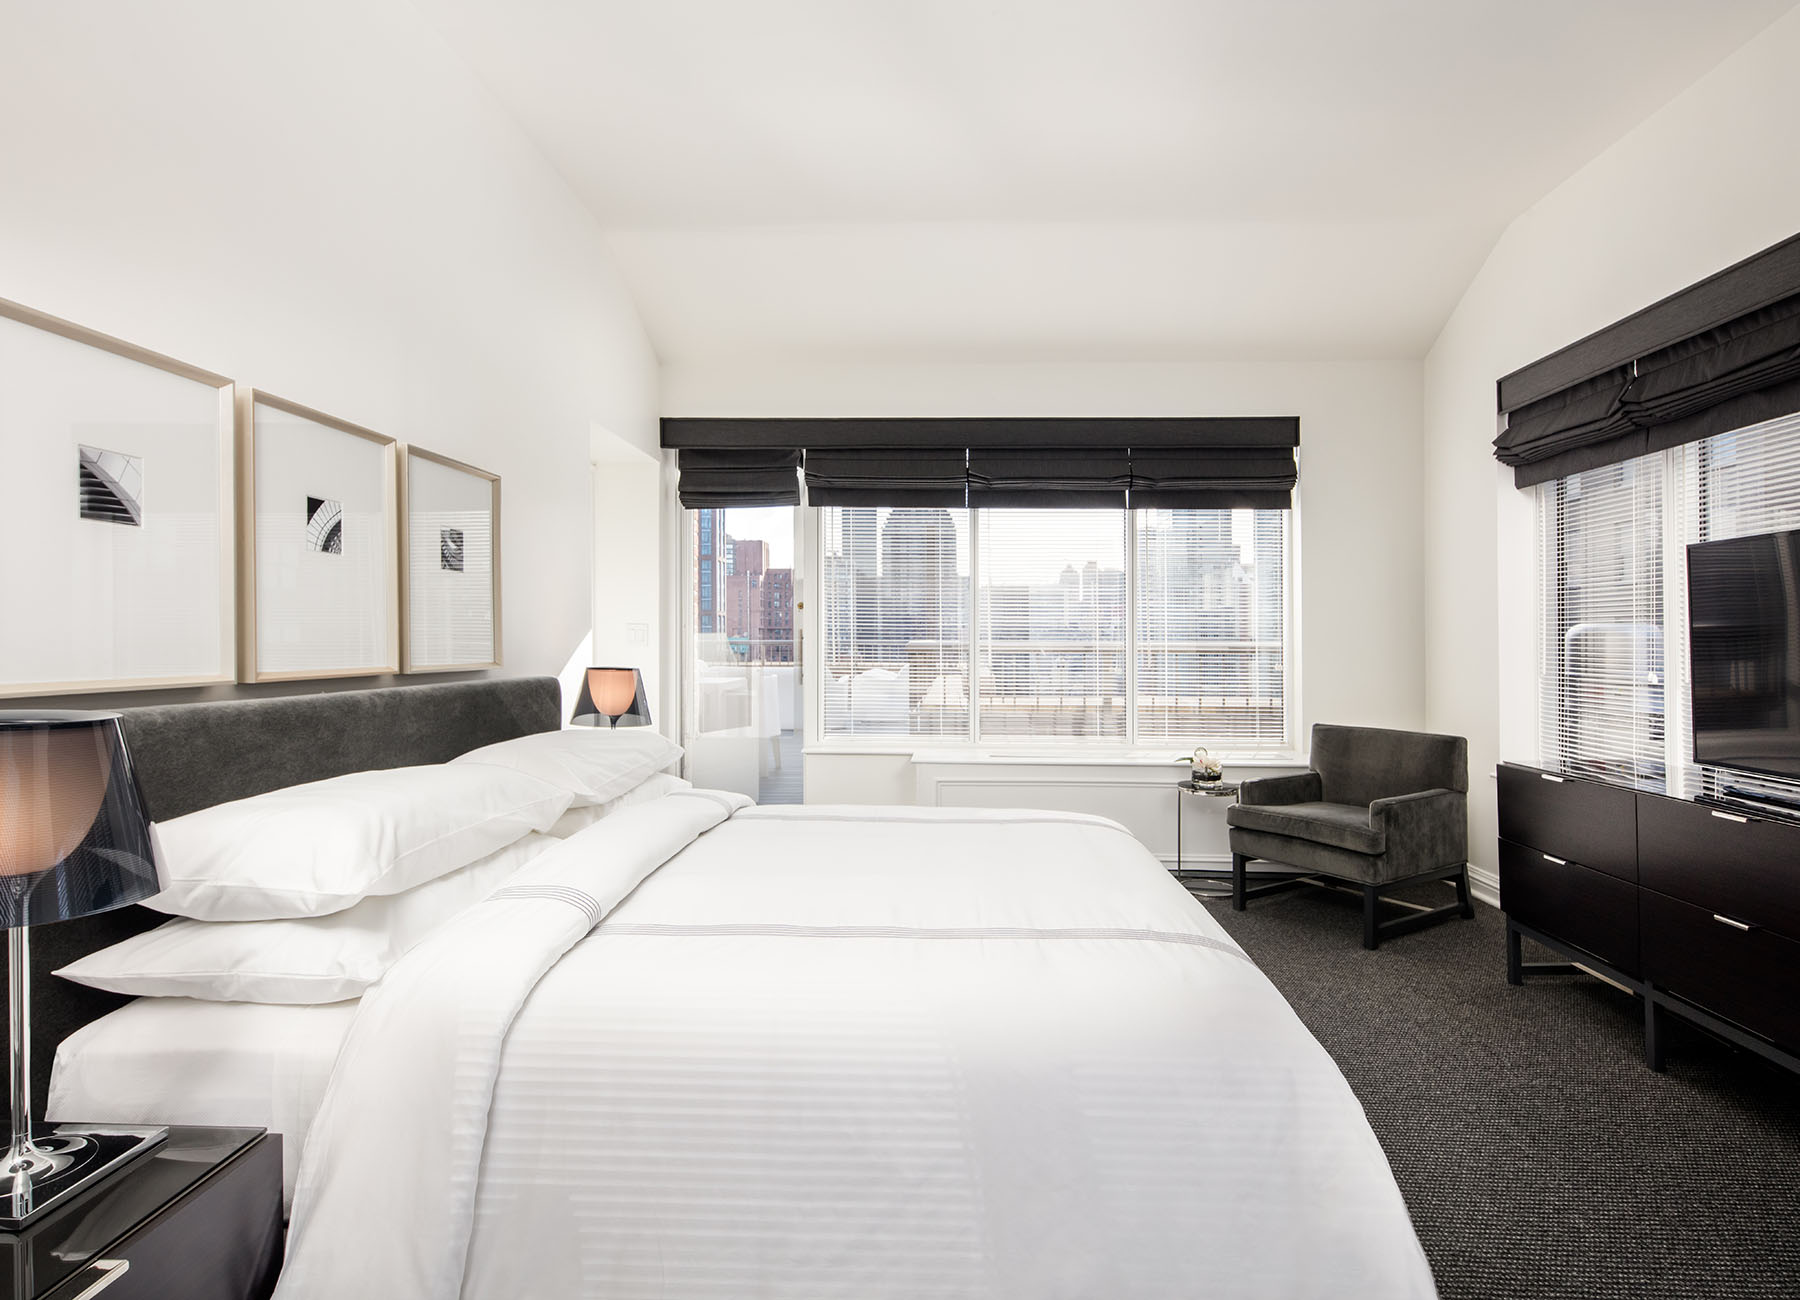 AKA Sutton Place furnished apartment spacious bedroom with white linens